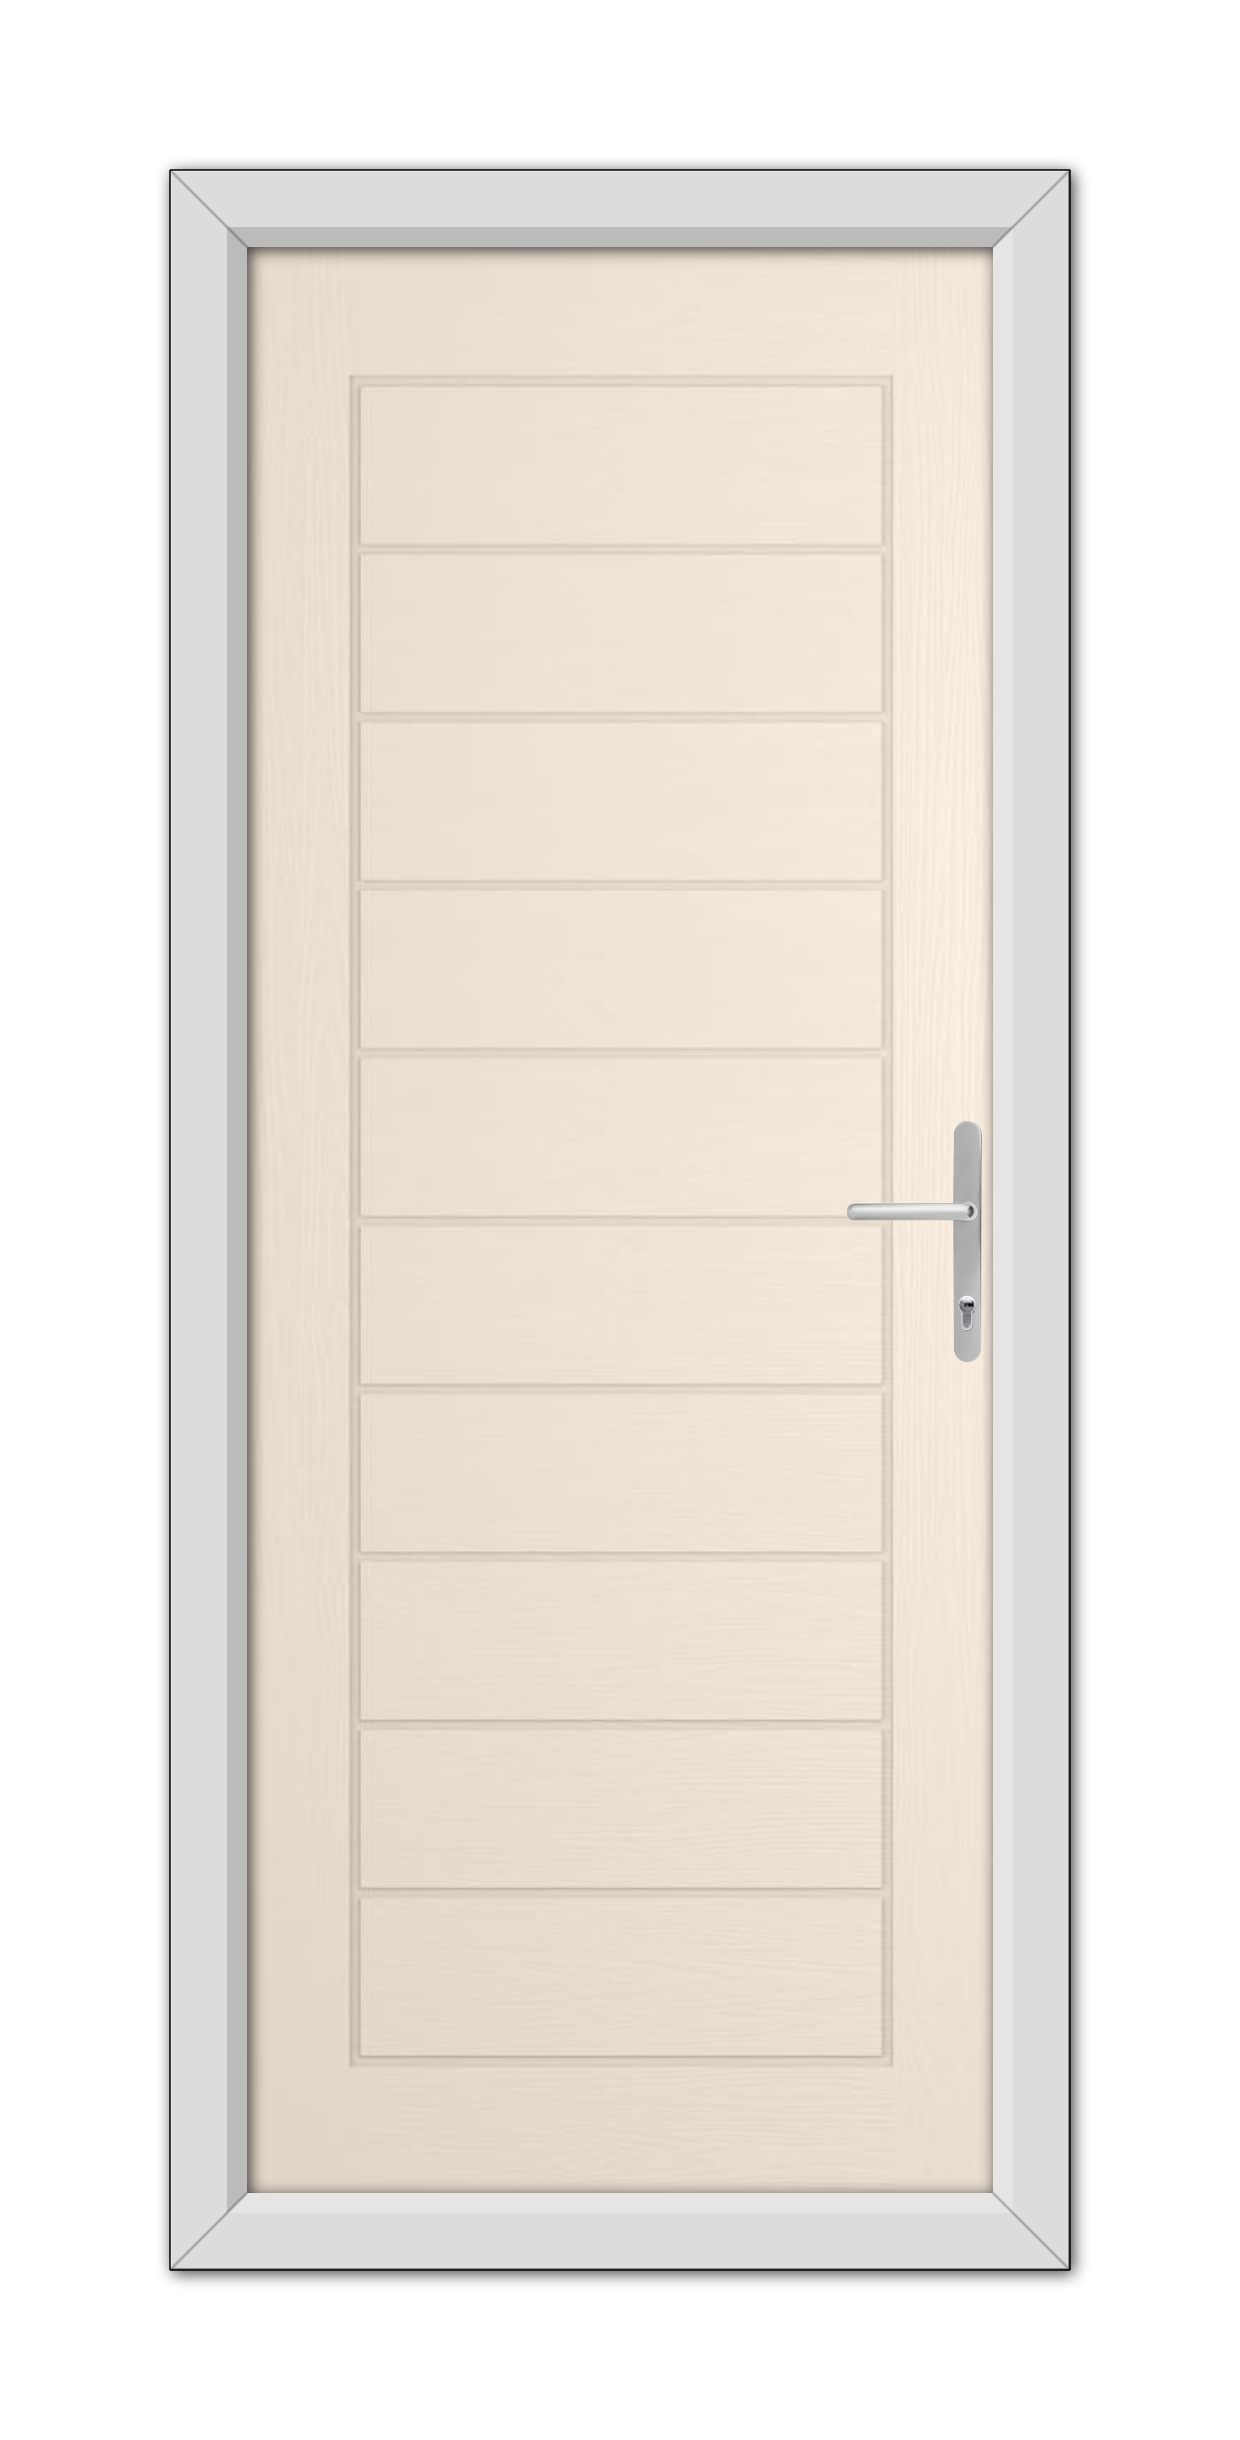 A modern Cream Cambridge Composite Door 48mm Timber Core with a silver handle, set in a grey frame, displayed against a white background.